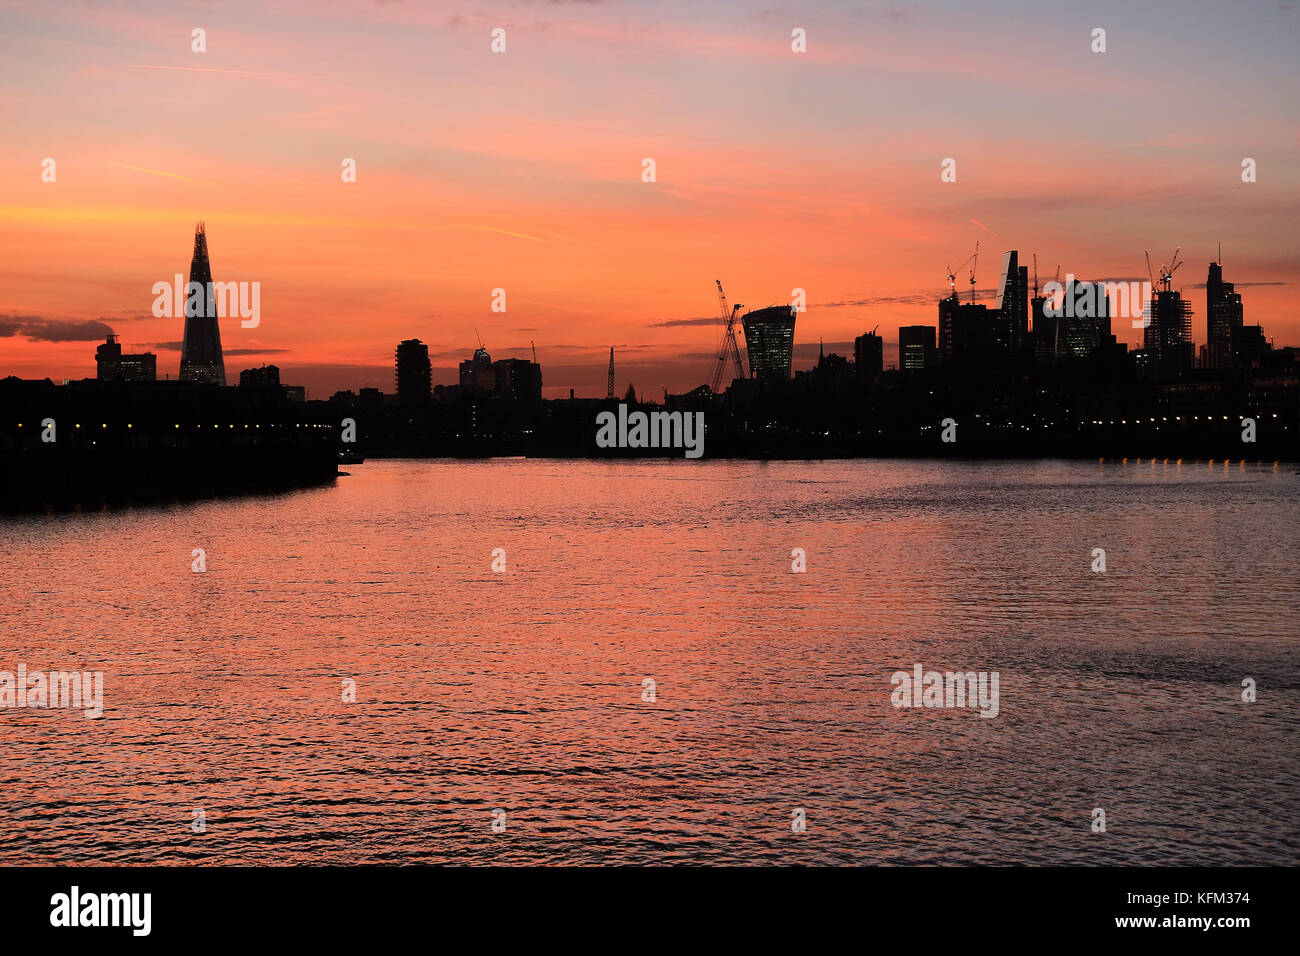 London, UK. 30th October, 2017. The stunning sunset across the City of London high lighting the iconic buildings that have sprung up in London recently and the vast amount of construction tower cranes creating even more skyscrapers. The photo is taken from the river bank at Canary Wharf. Credit: Nigel Bowles/Alamy Live News Stock Photo